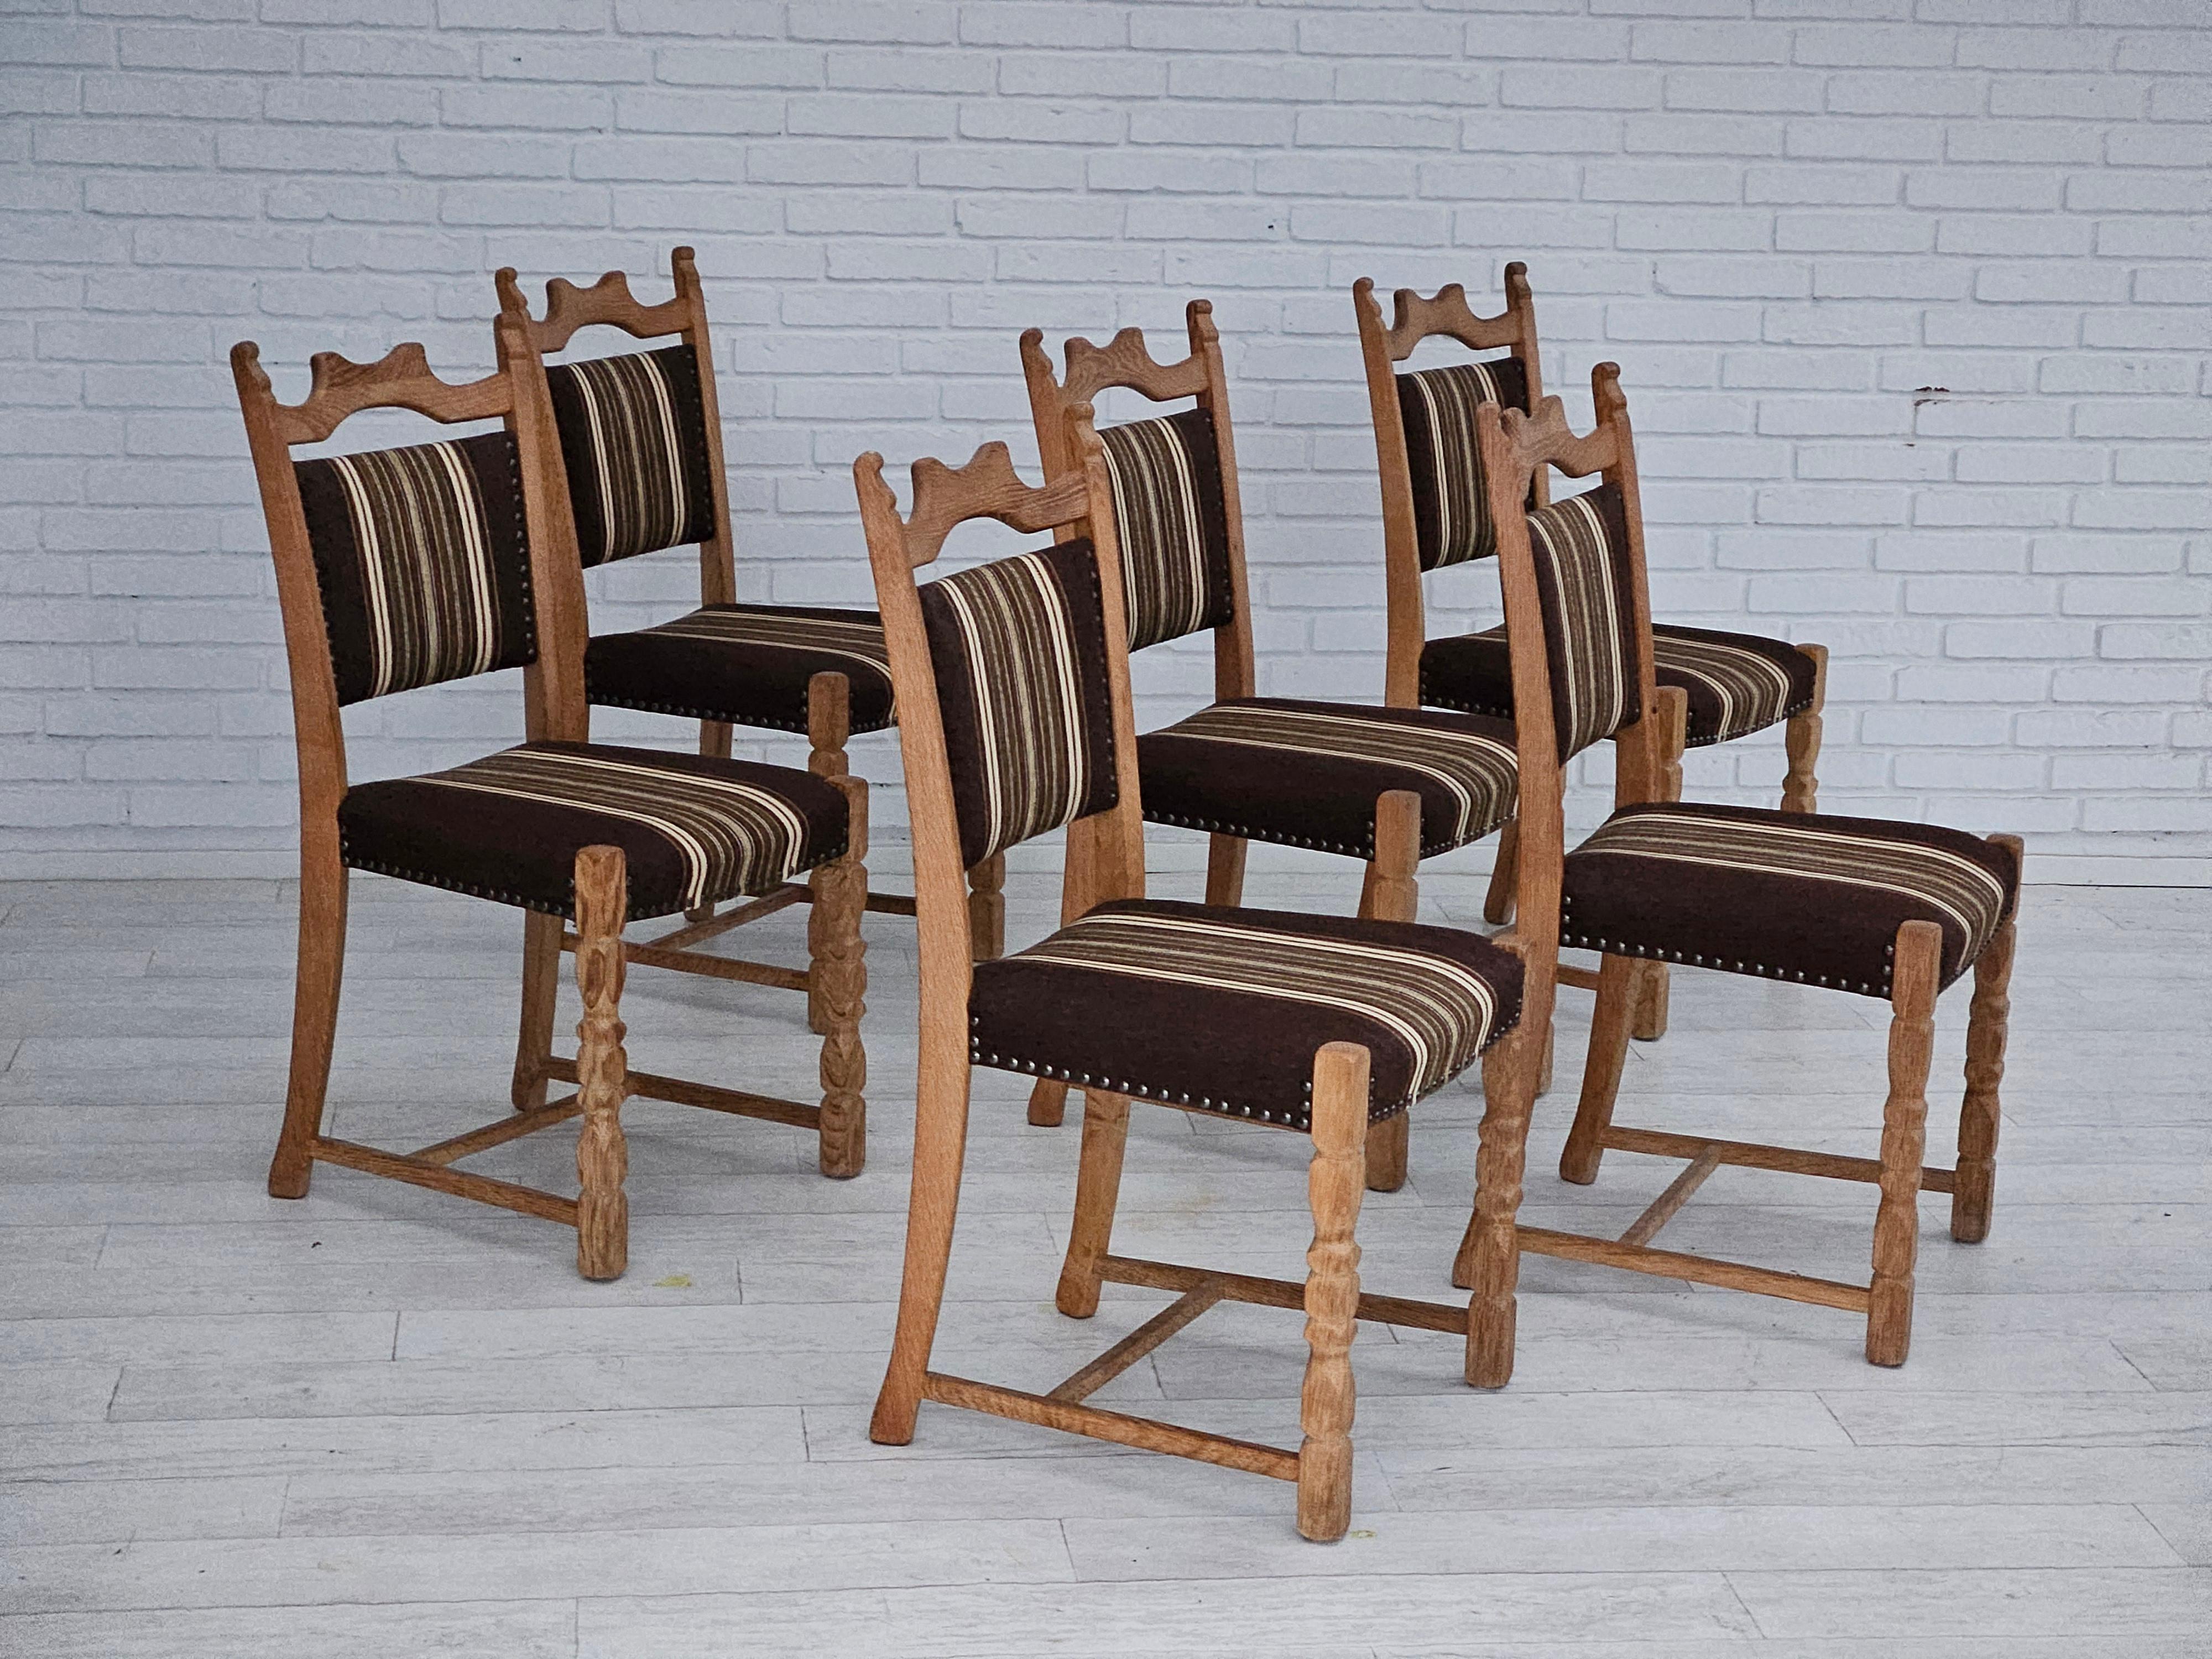 1970s, set of 6 pcs Danish dining chairs. Original very good condition ( used not too much from 1970s): no smells and no stains. Furniture wool fabric, oak wood. Manufactured by Danish furniture manufacturer in about 1960s.